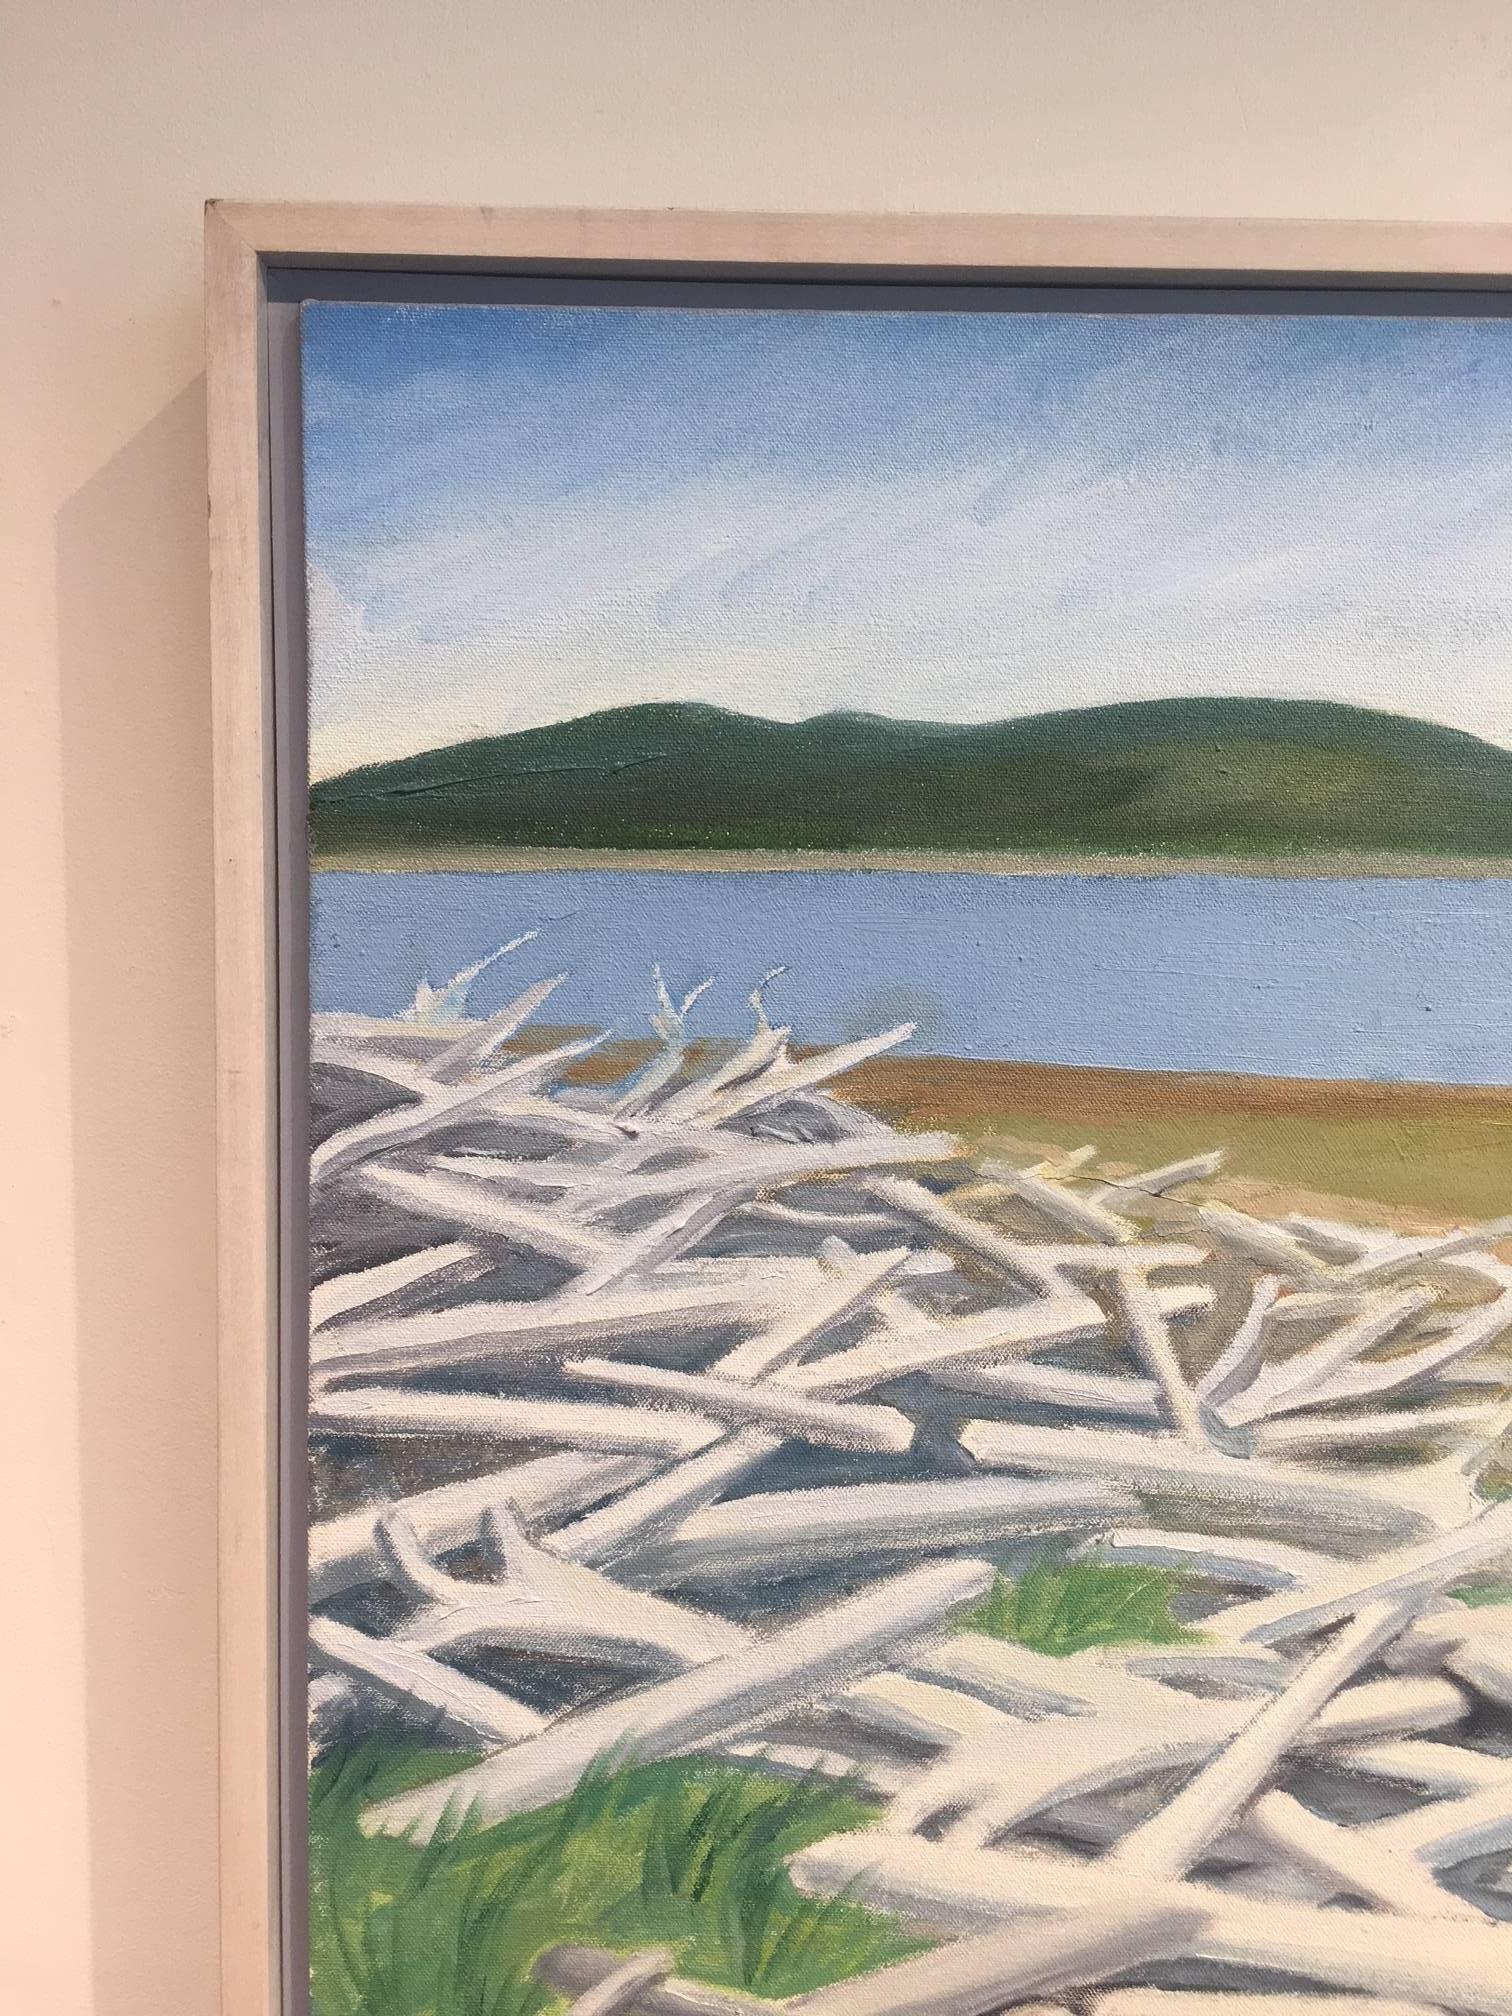 Studio 21 has a selection of paintings from Doris McCarthy’s time spent in Atlantic Canada. This landscape oil painting comes directly from the estate.

Doris McCarthy was one of the leading and most affectionately regarded female Canadian painters